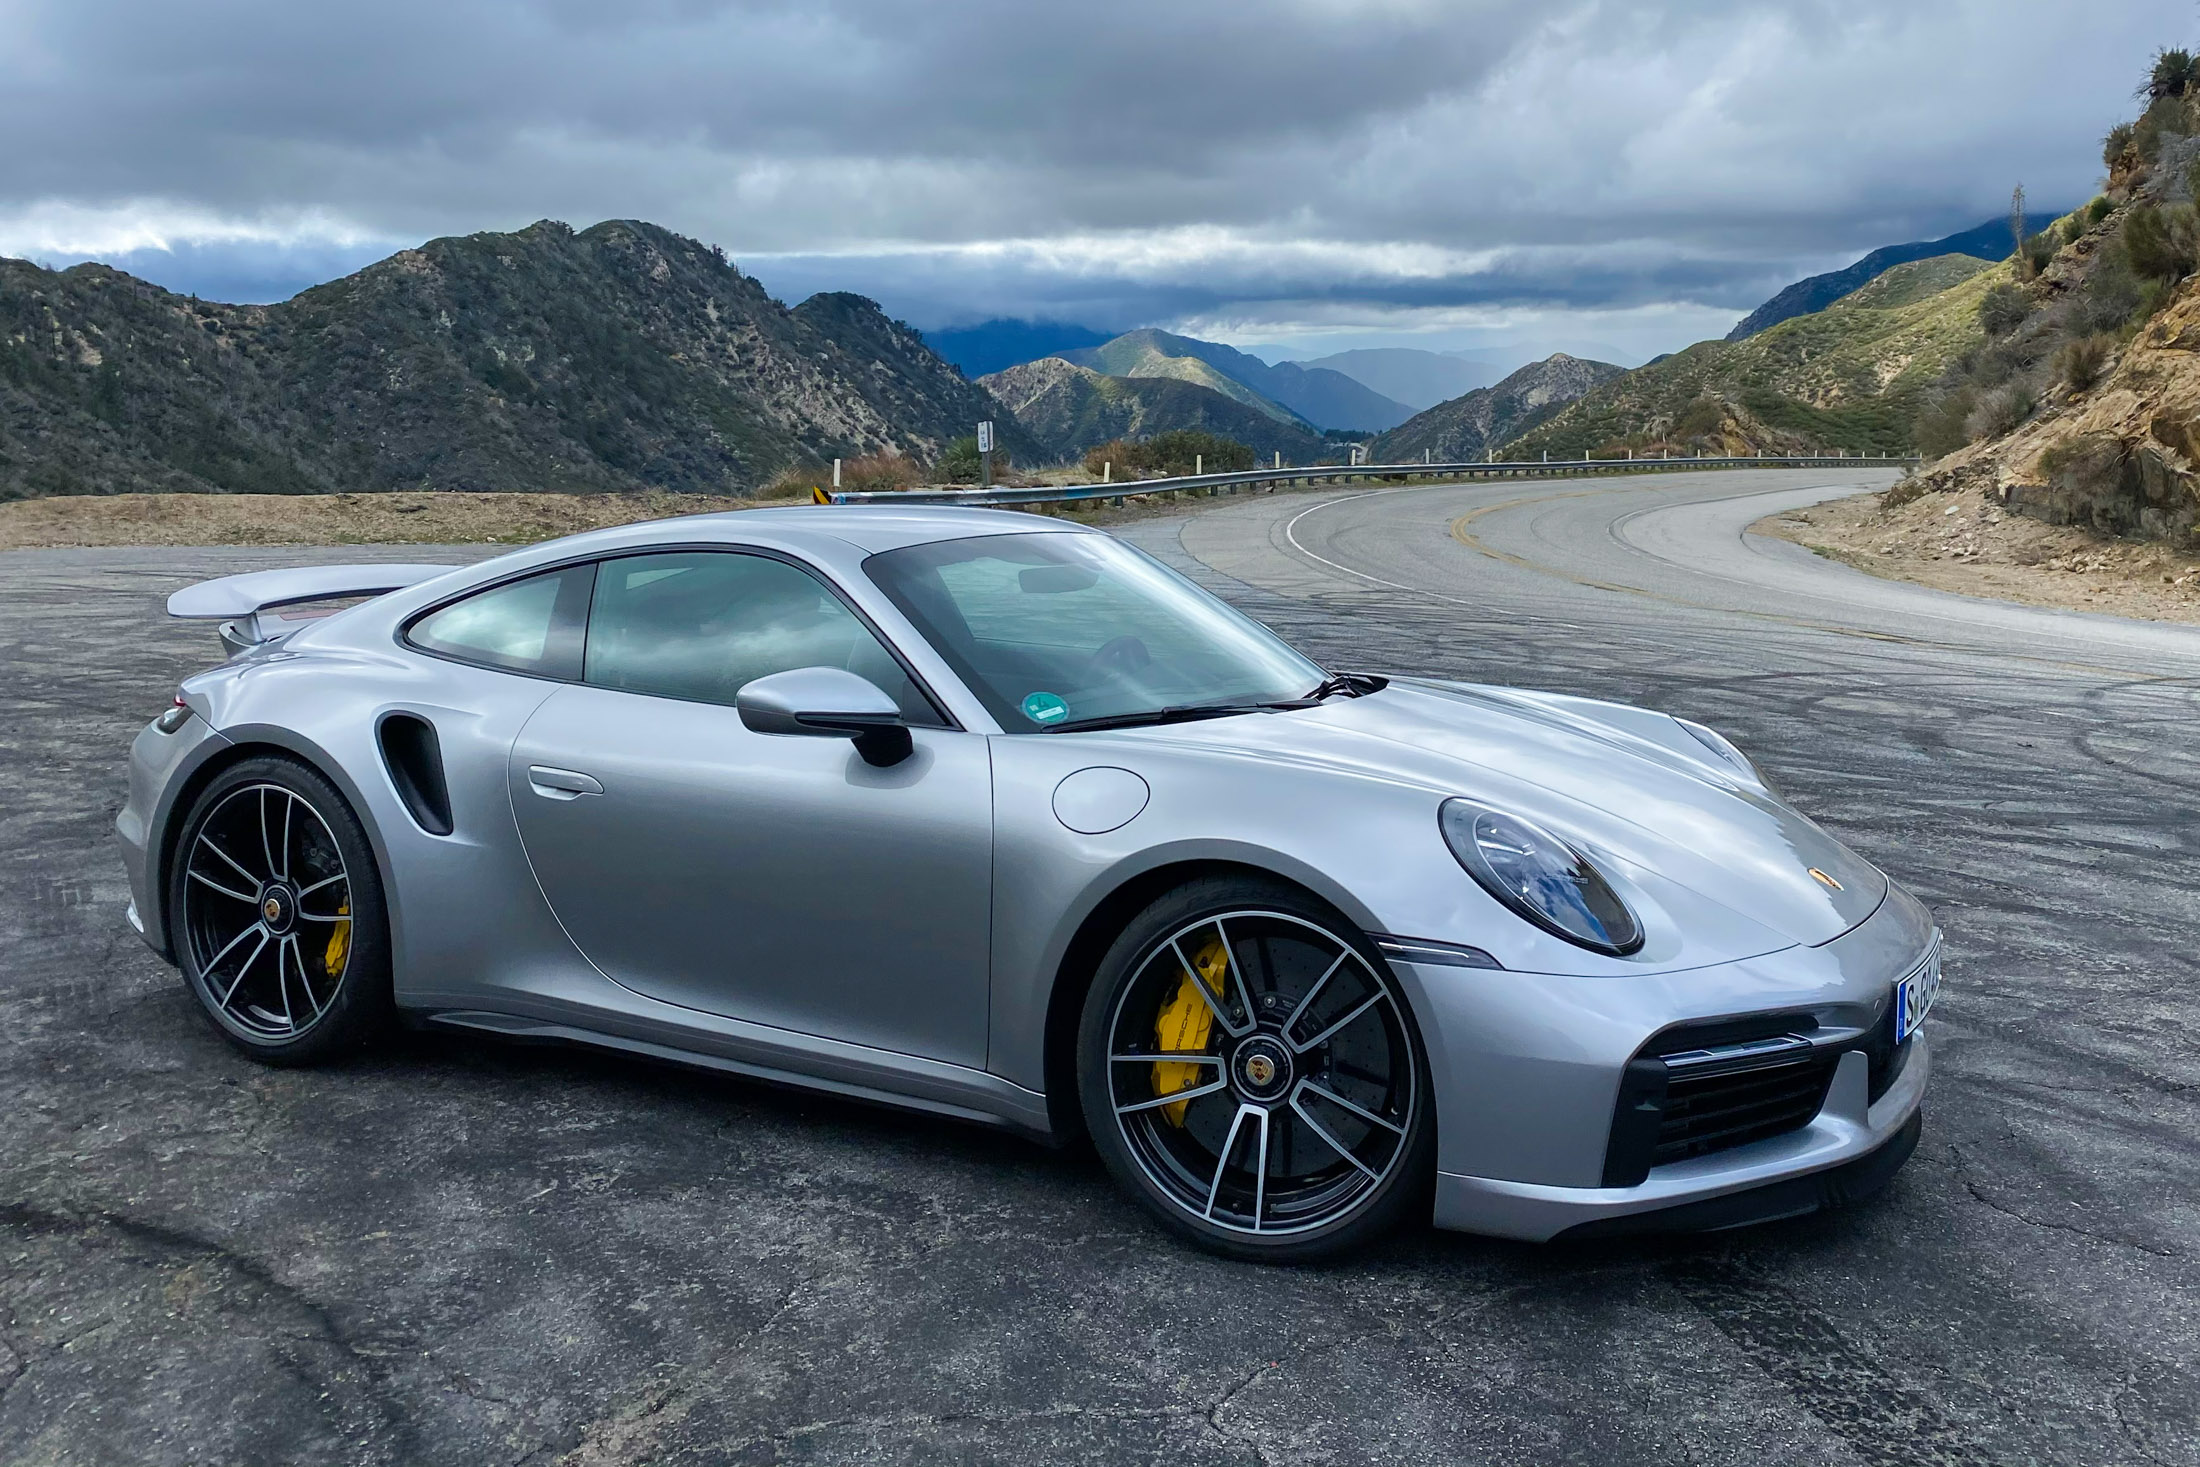 Why It Takes Five People To Operate LA's Famous Porsche Camera Car